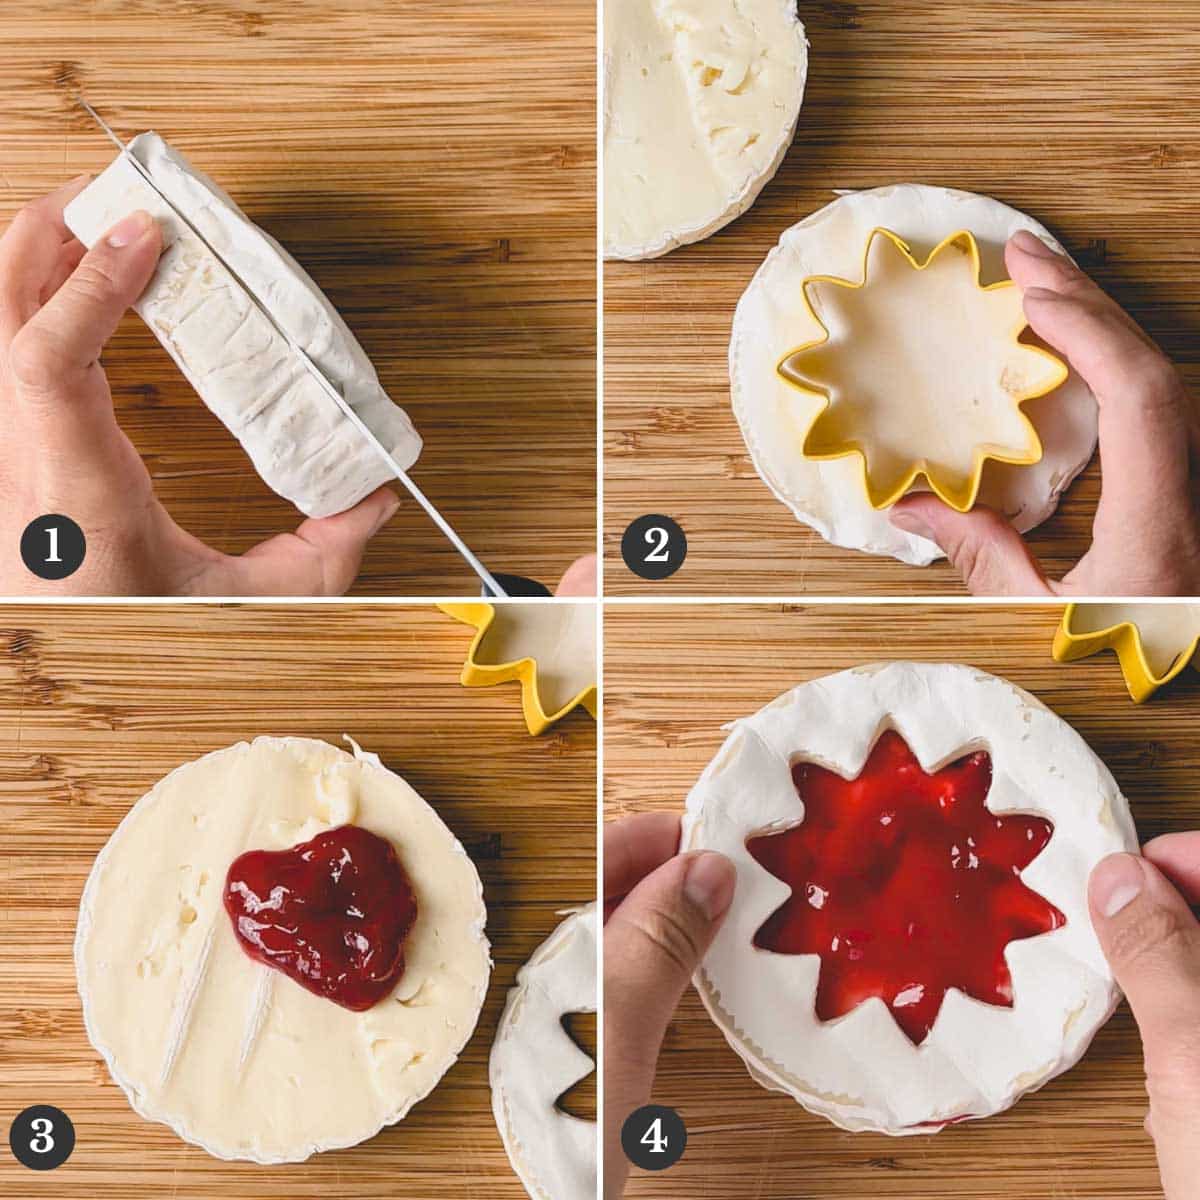 Step by step tutorial to cut out brie and filling with jam.